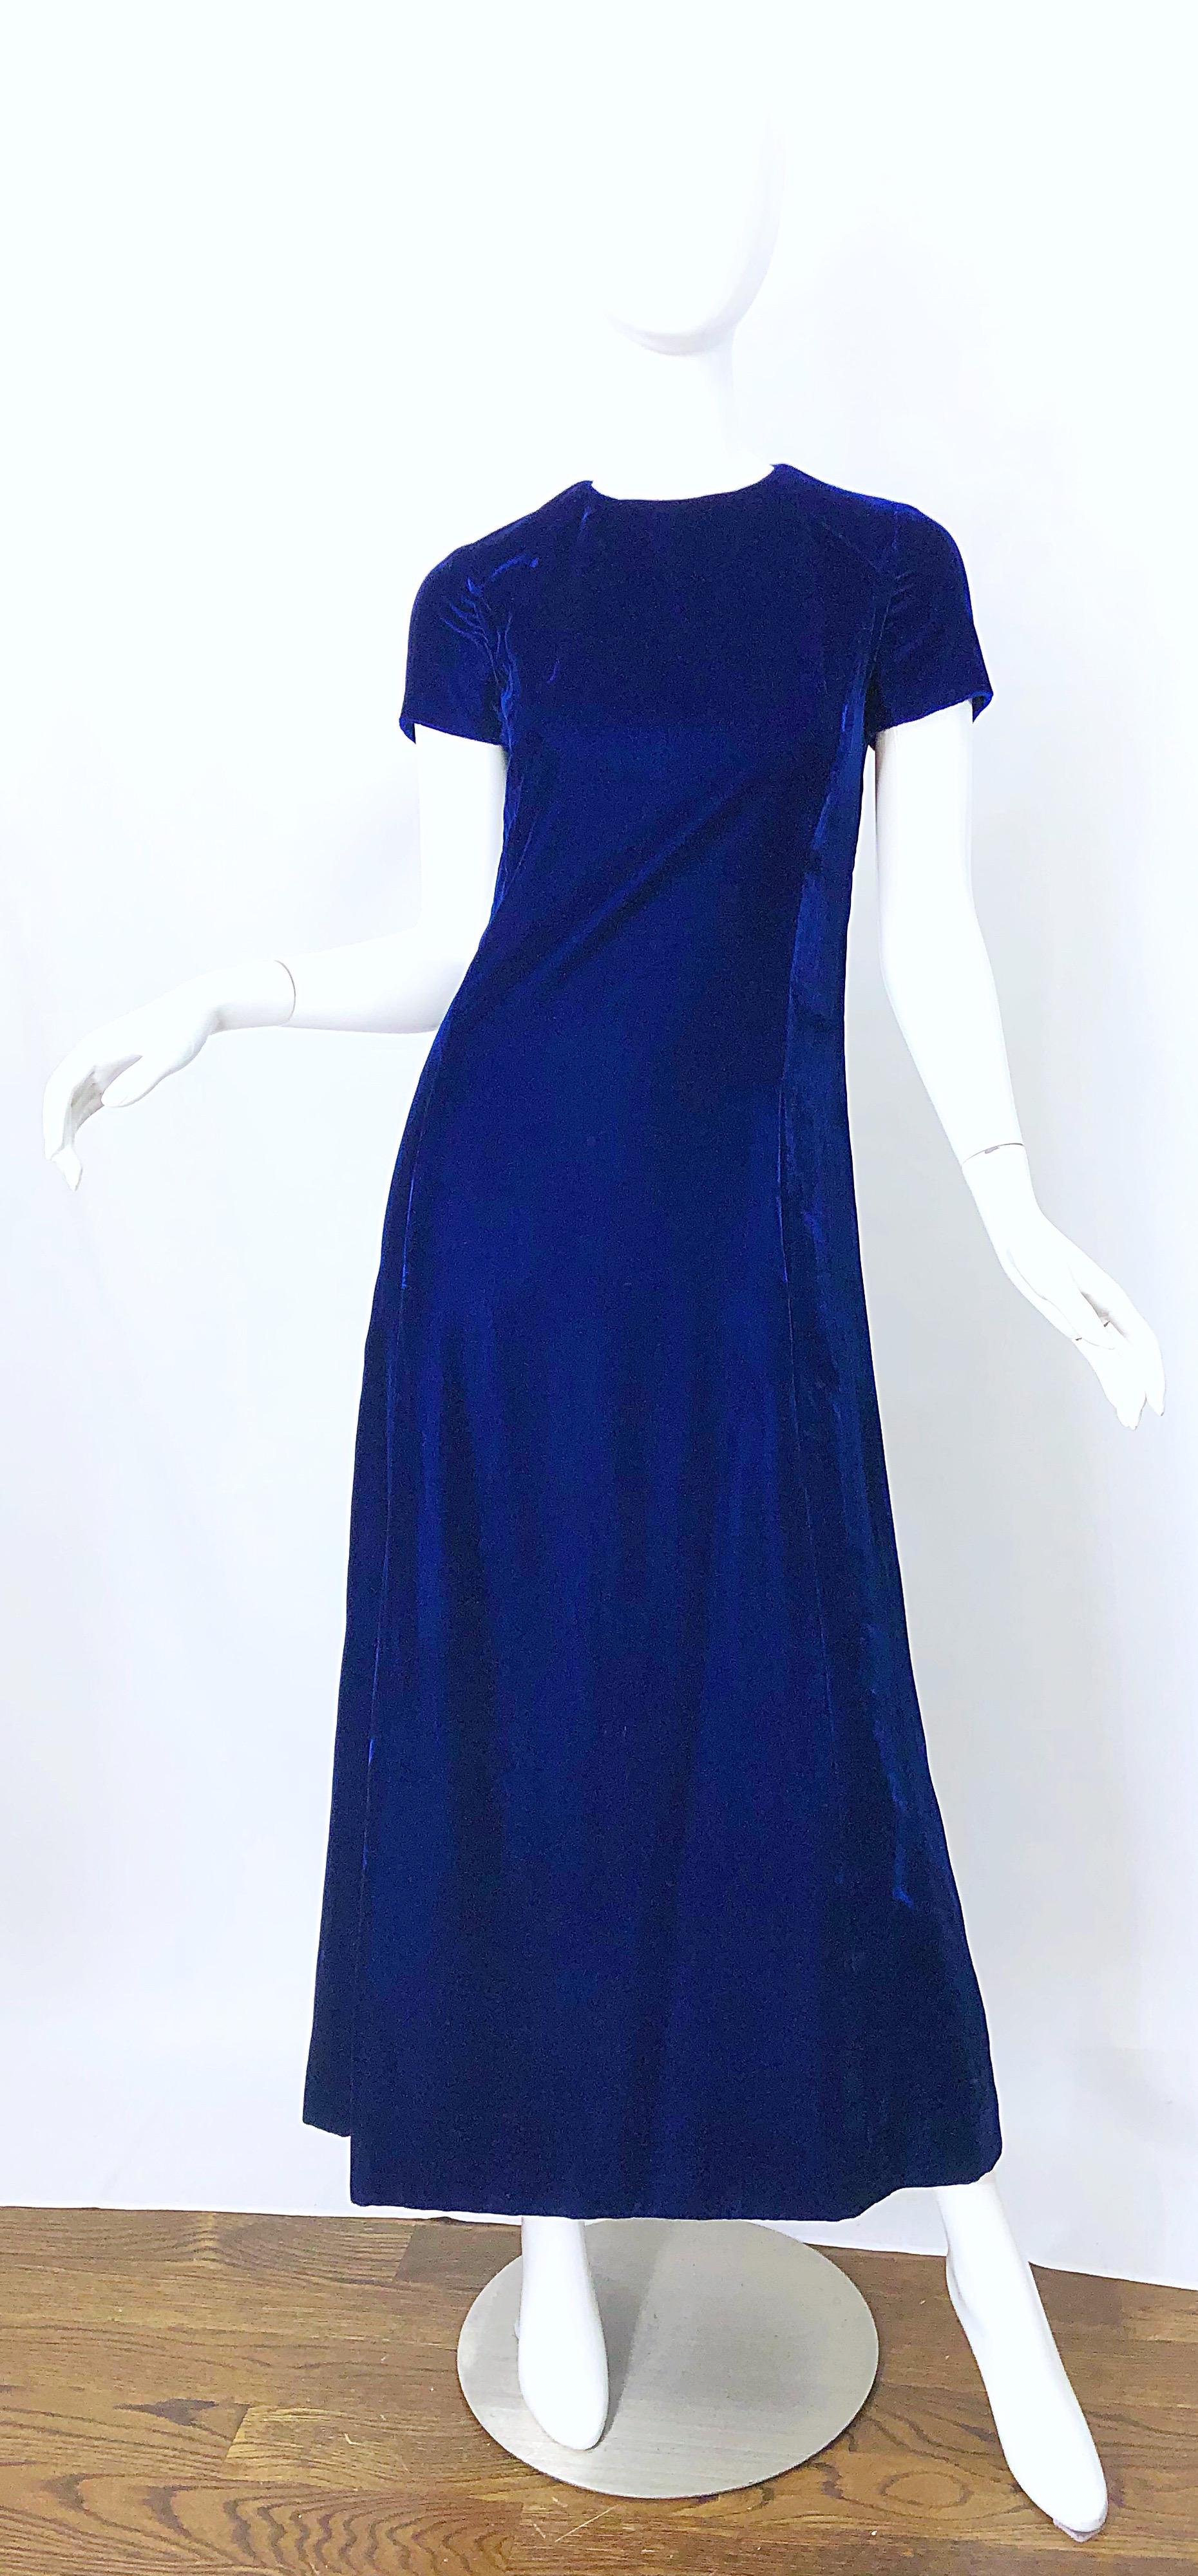 Chic early 70s navy blue silk velvet short sleeve maxi dress! Features a rich vibrant shade of navy blue. Tailored fitted bodice with a forgiving skirt. Full metal zipper up the back with hook-and-eye closure. POCKETS at each side of the waist.